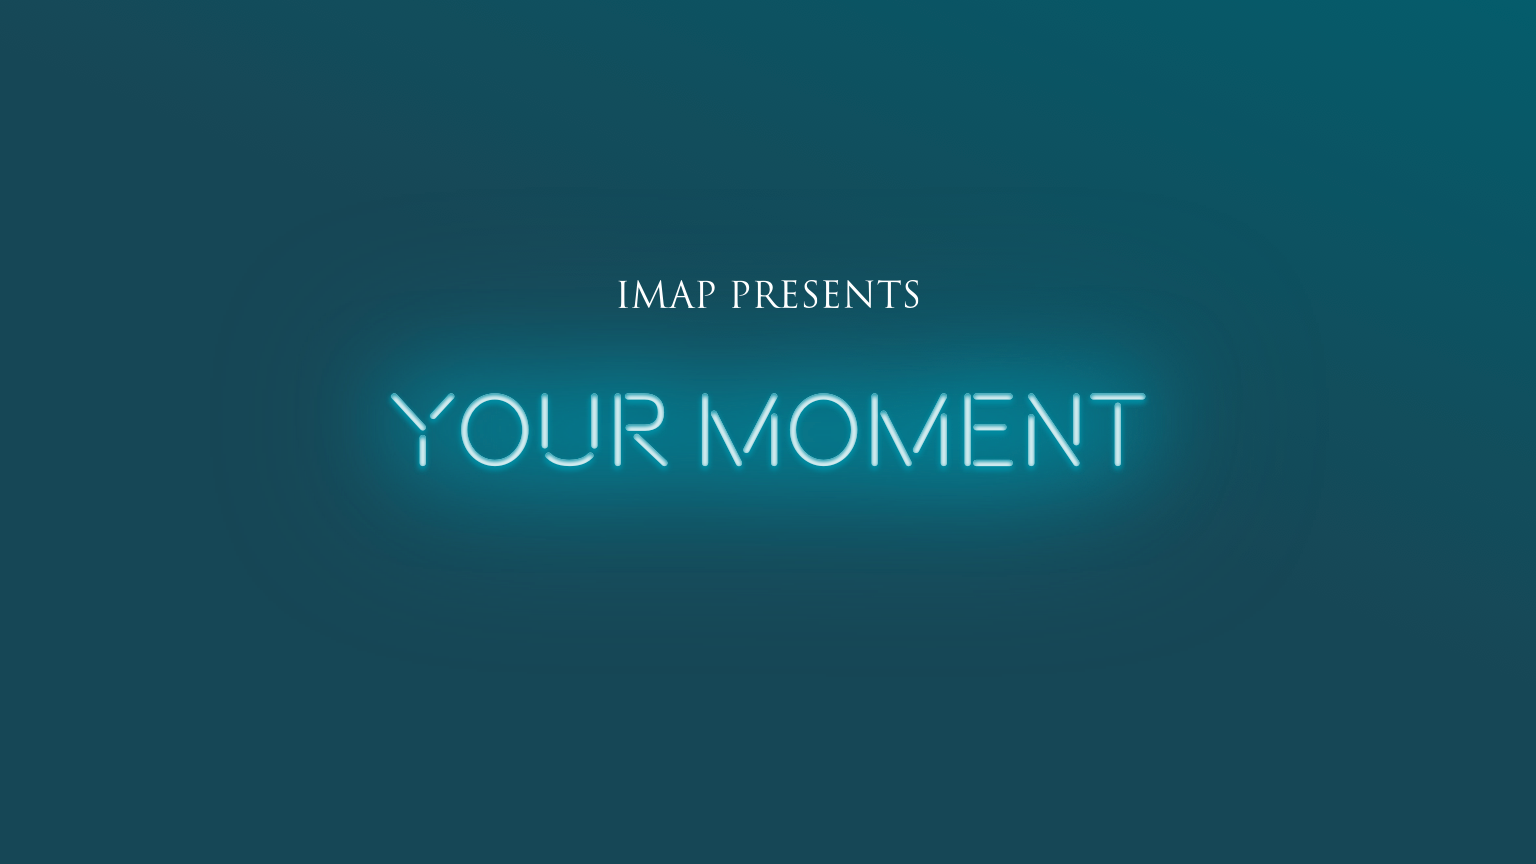 imap presents your moment